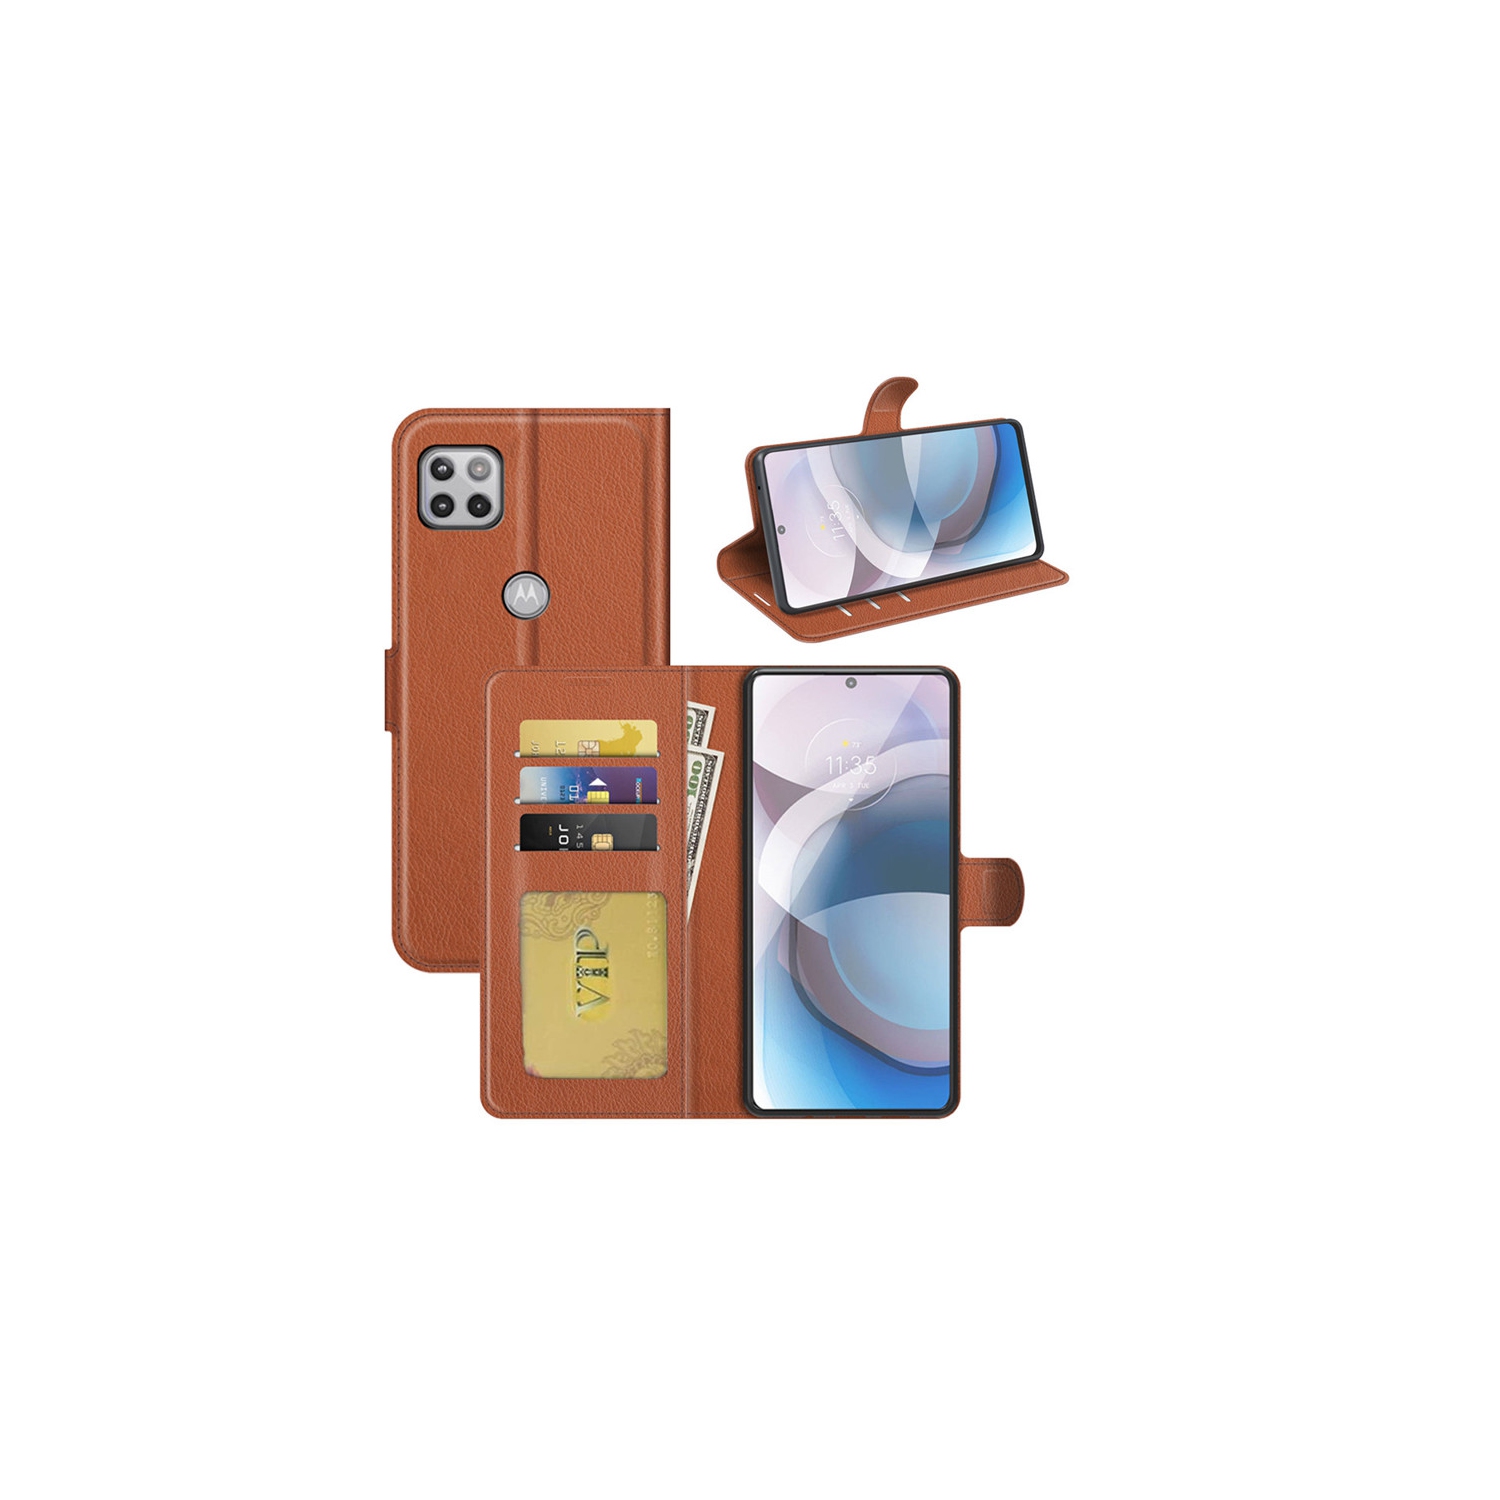 [CS] Motorola Moto One 5G Ace Case, Magnetic Leather Folio Wallet Flip Case Cover with Card Slot, Brown